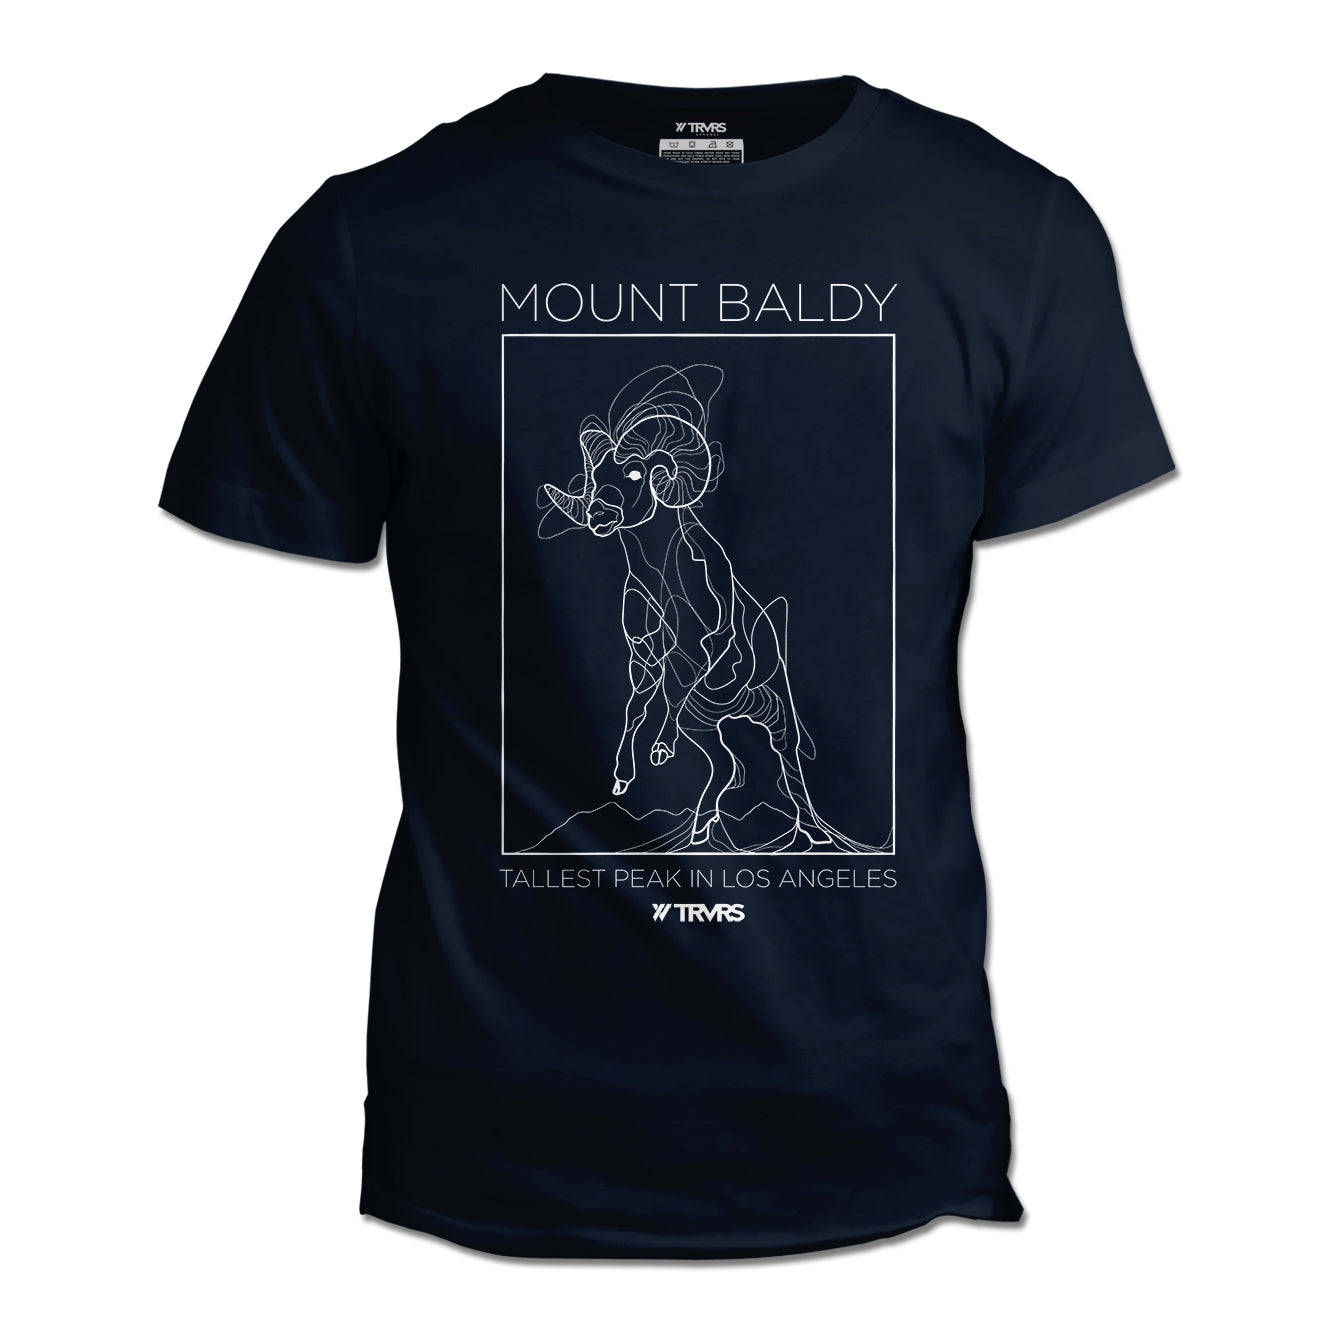 Mount Baldy Big Horn Tee V2 - NAVY | TRVRS Outdoors, hiking apparel, san gabriel mountains, angeles national forest, trail running, mountaineering